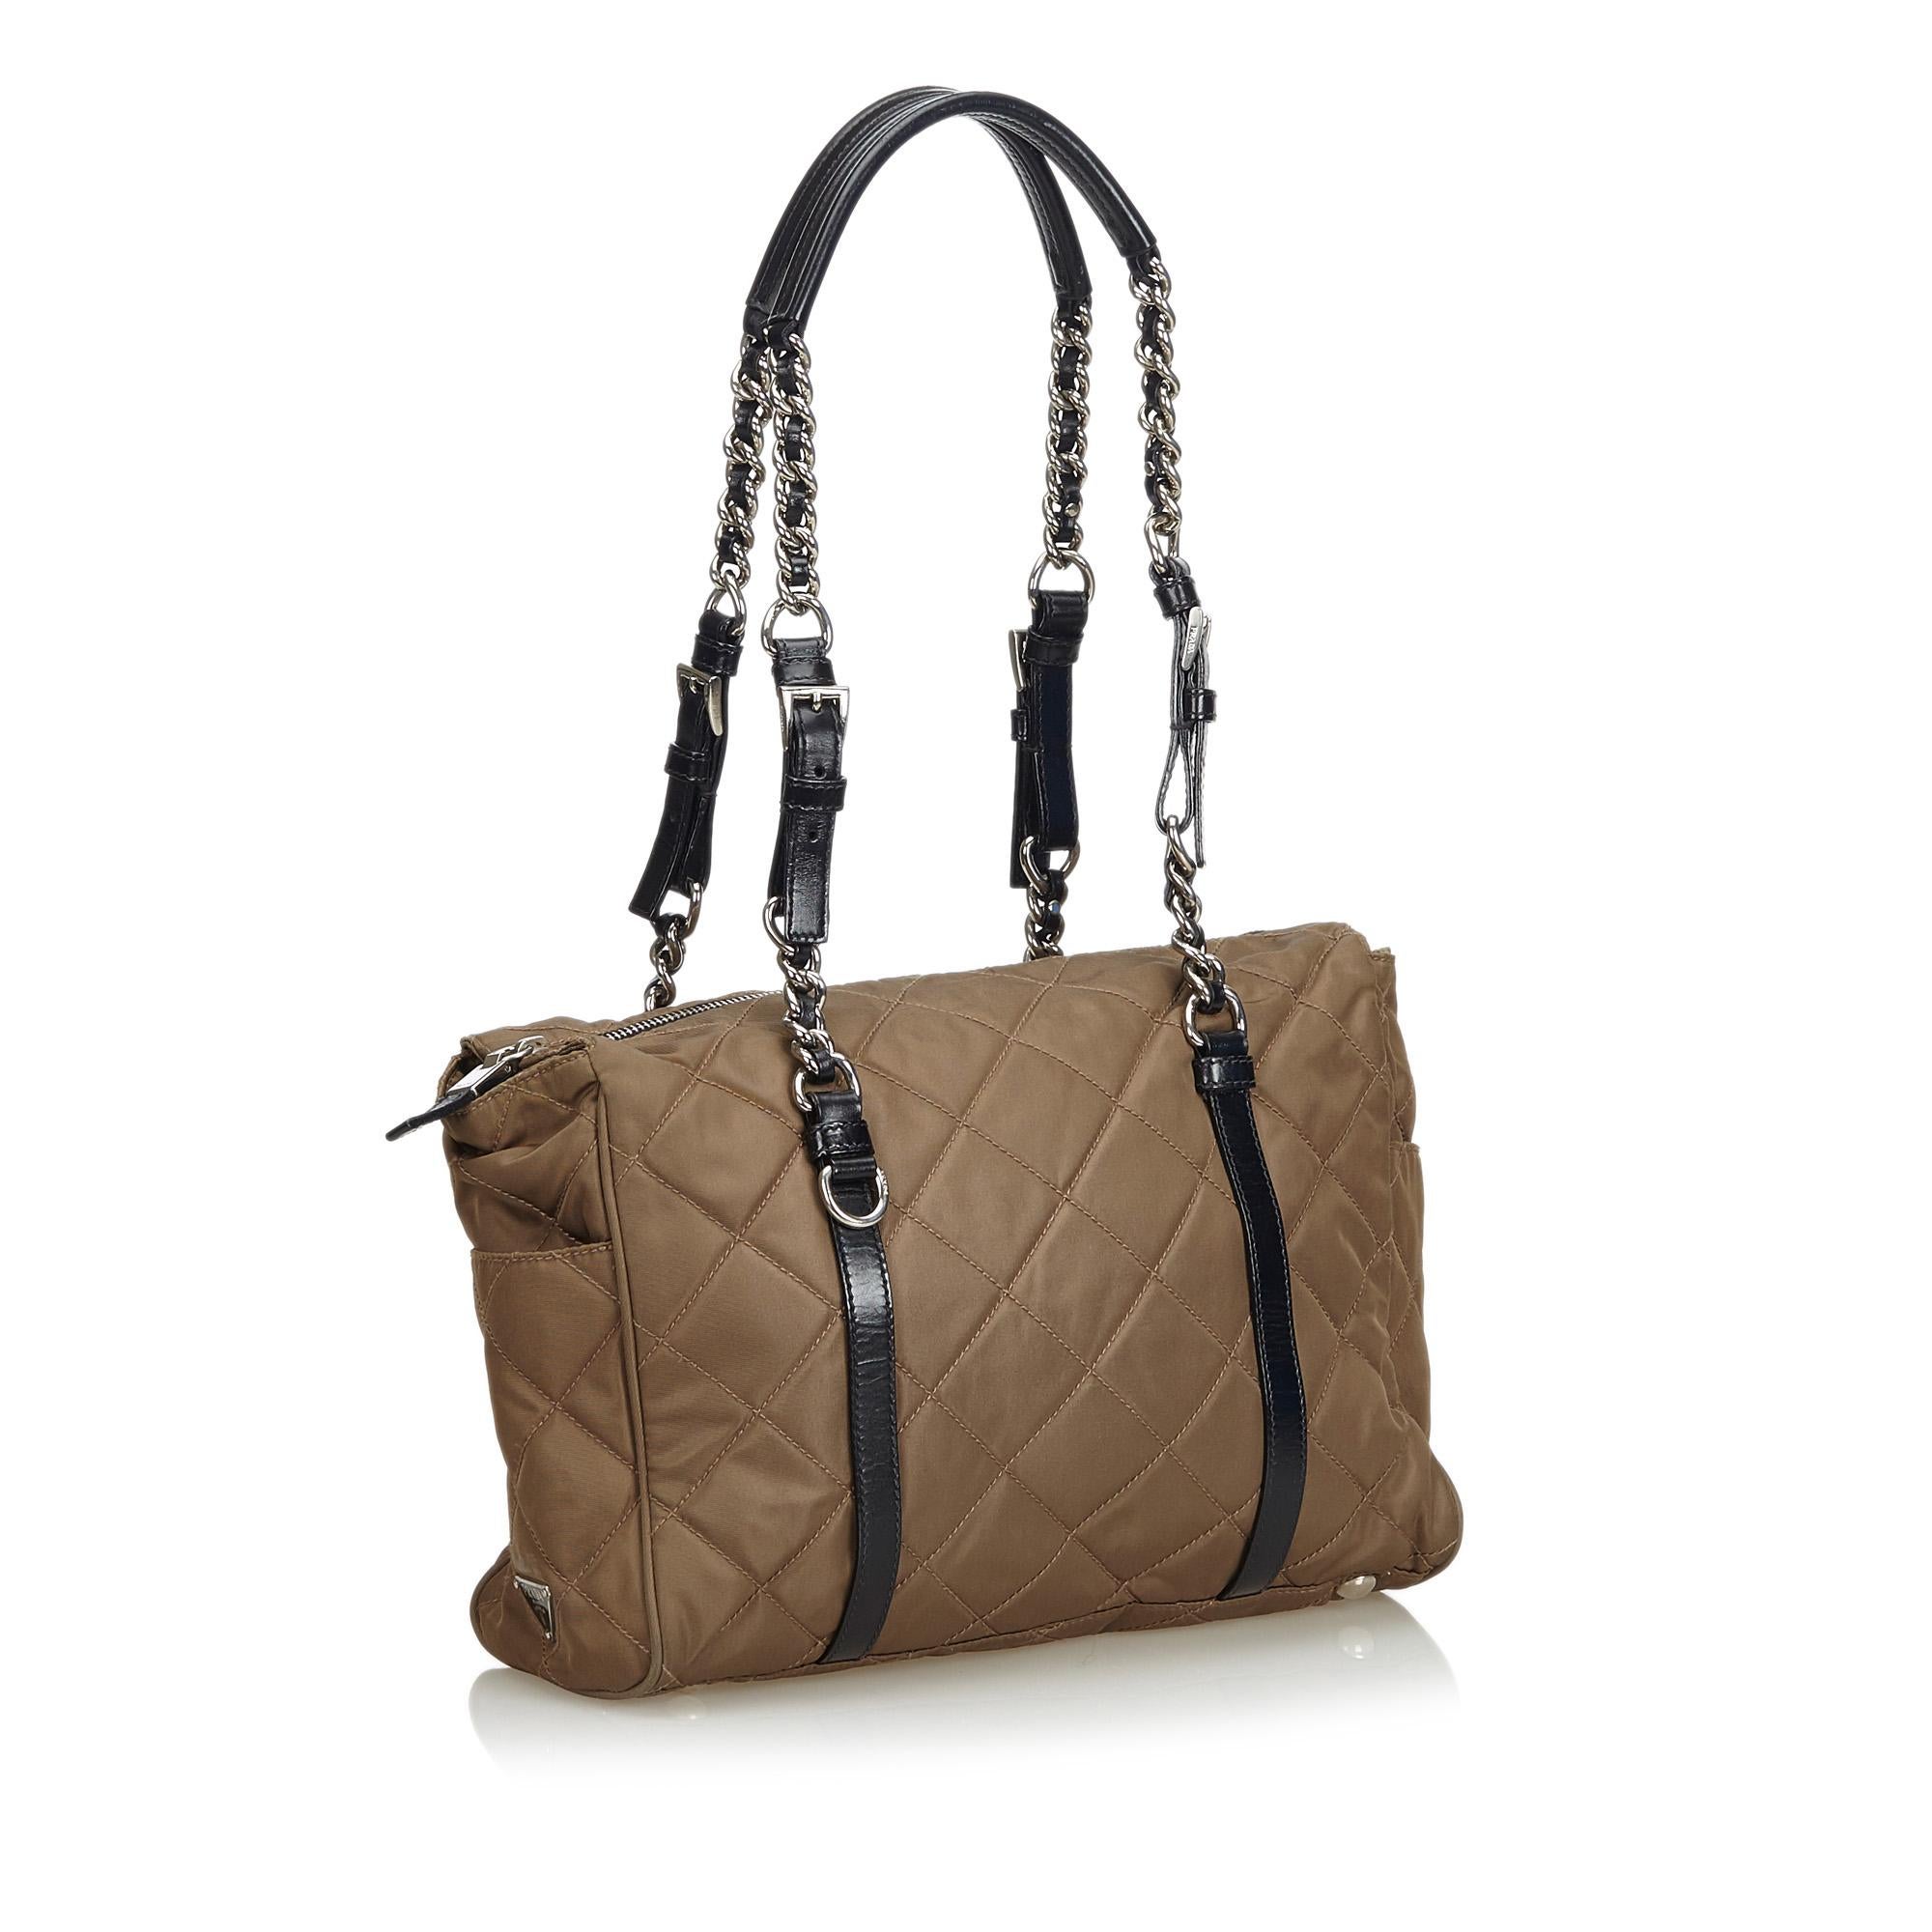 This shoulder bag features a quilted nylon body, exterior side slip pockets, silver-tone shoulder chain, a top zip closure, and interior zip pocket. It carries as AB condition rating.

Inclusions: 
Authenticity Card

Dimensions:
Length: 25.00